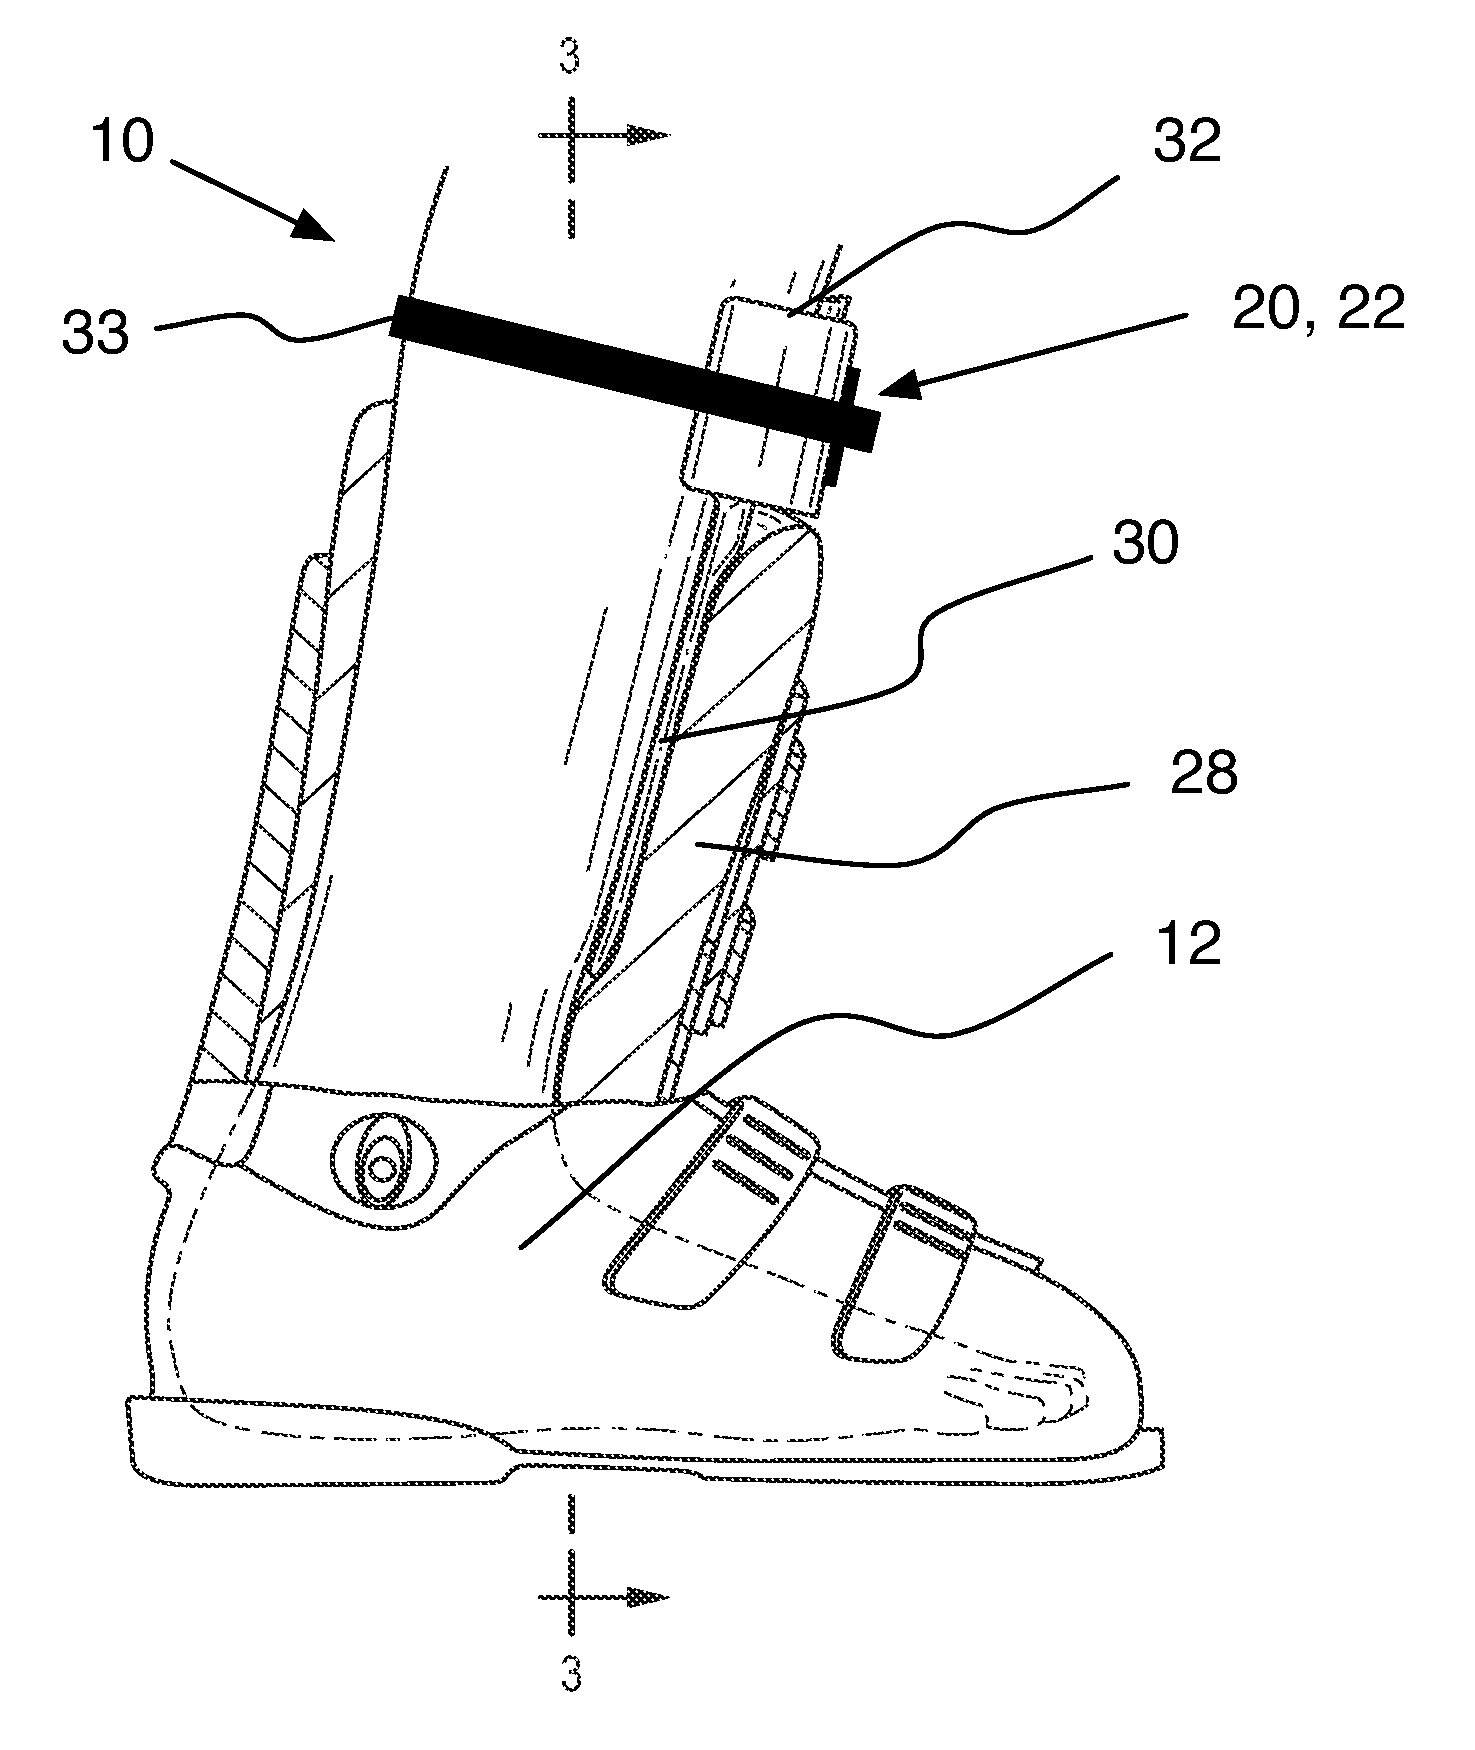 Sport performance monitoring apparatus including a flexible boot pressure sensor communicable with a boot pressure sensor input, process and method of use